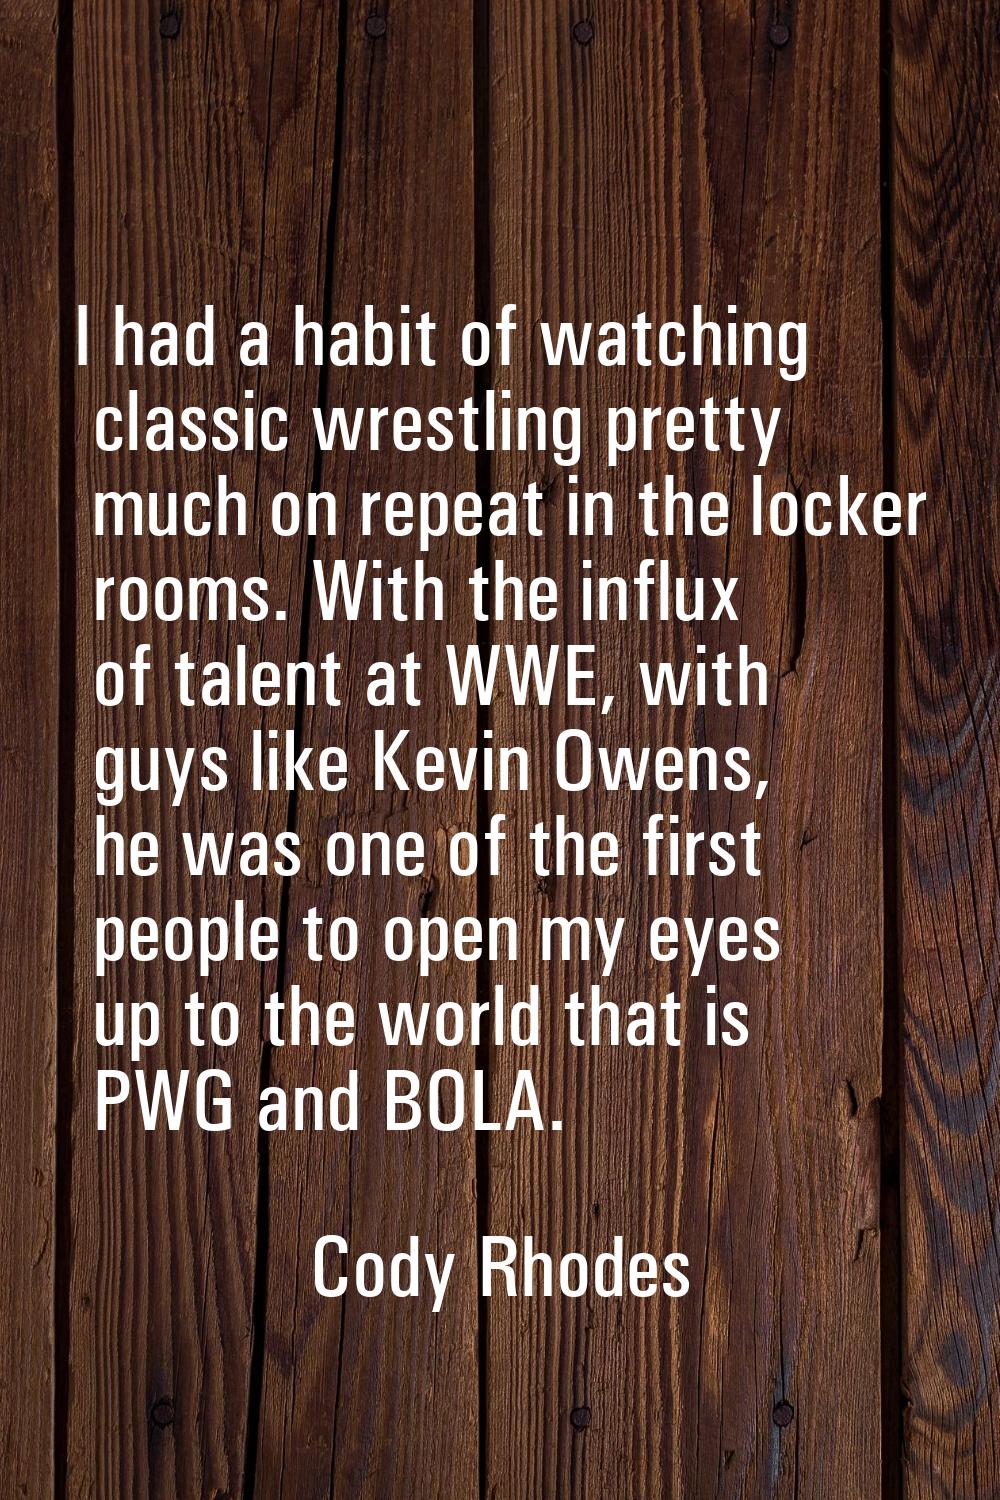 I had a habit of watching classic wrestling pretty much on repeat in the locker rooms. With the inf